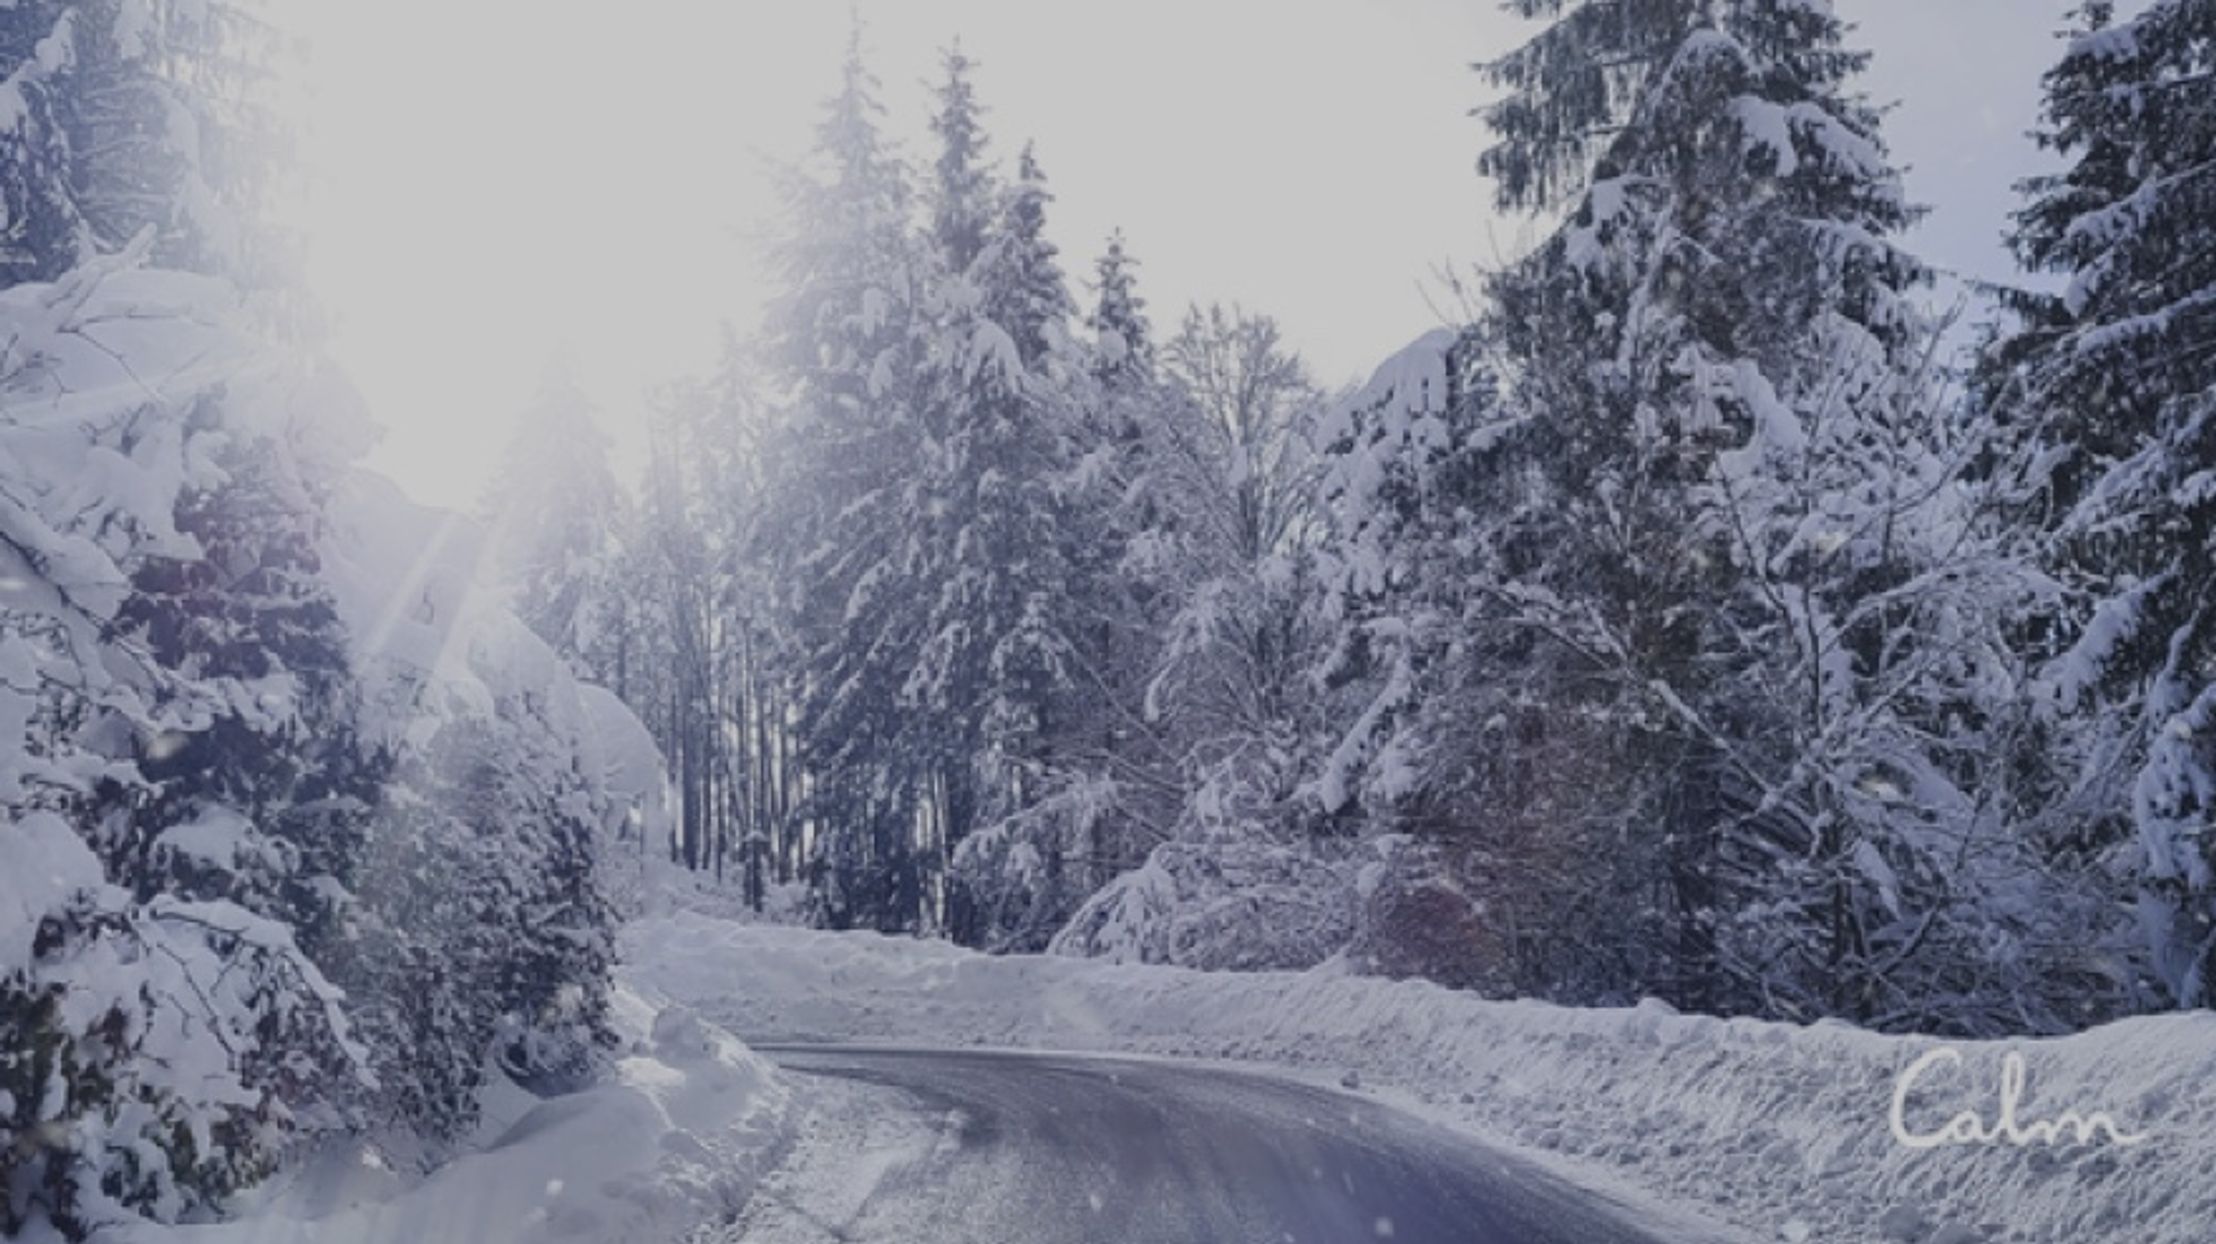 A road surrounded by pine trees, covered in picturesque snow, with the sun shining through the trees. The Calm logo is in the lower right corner.